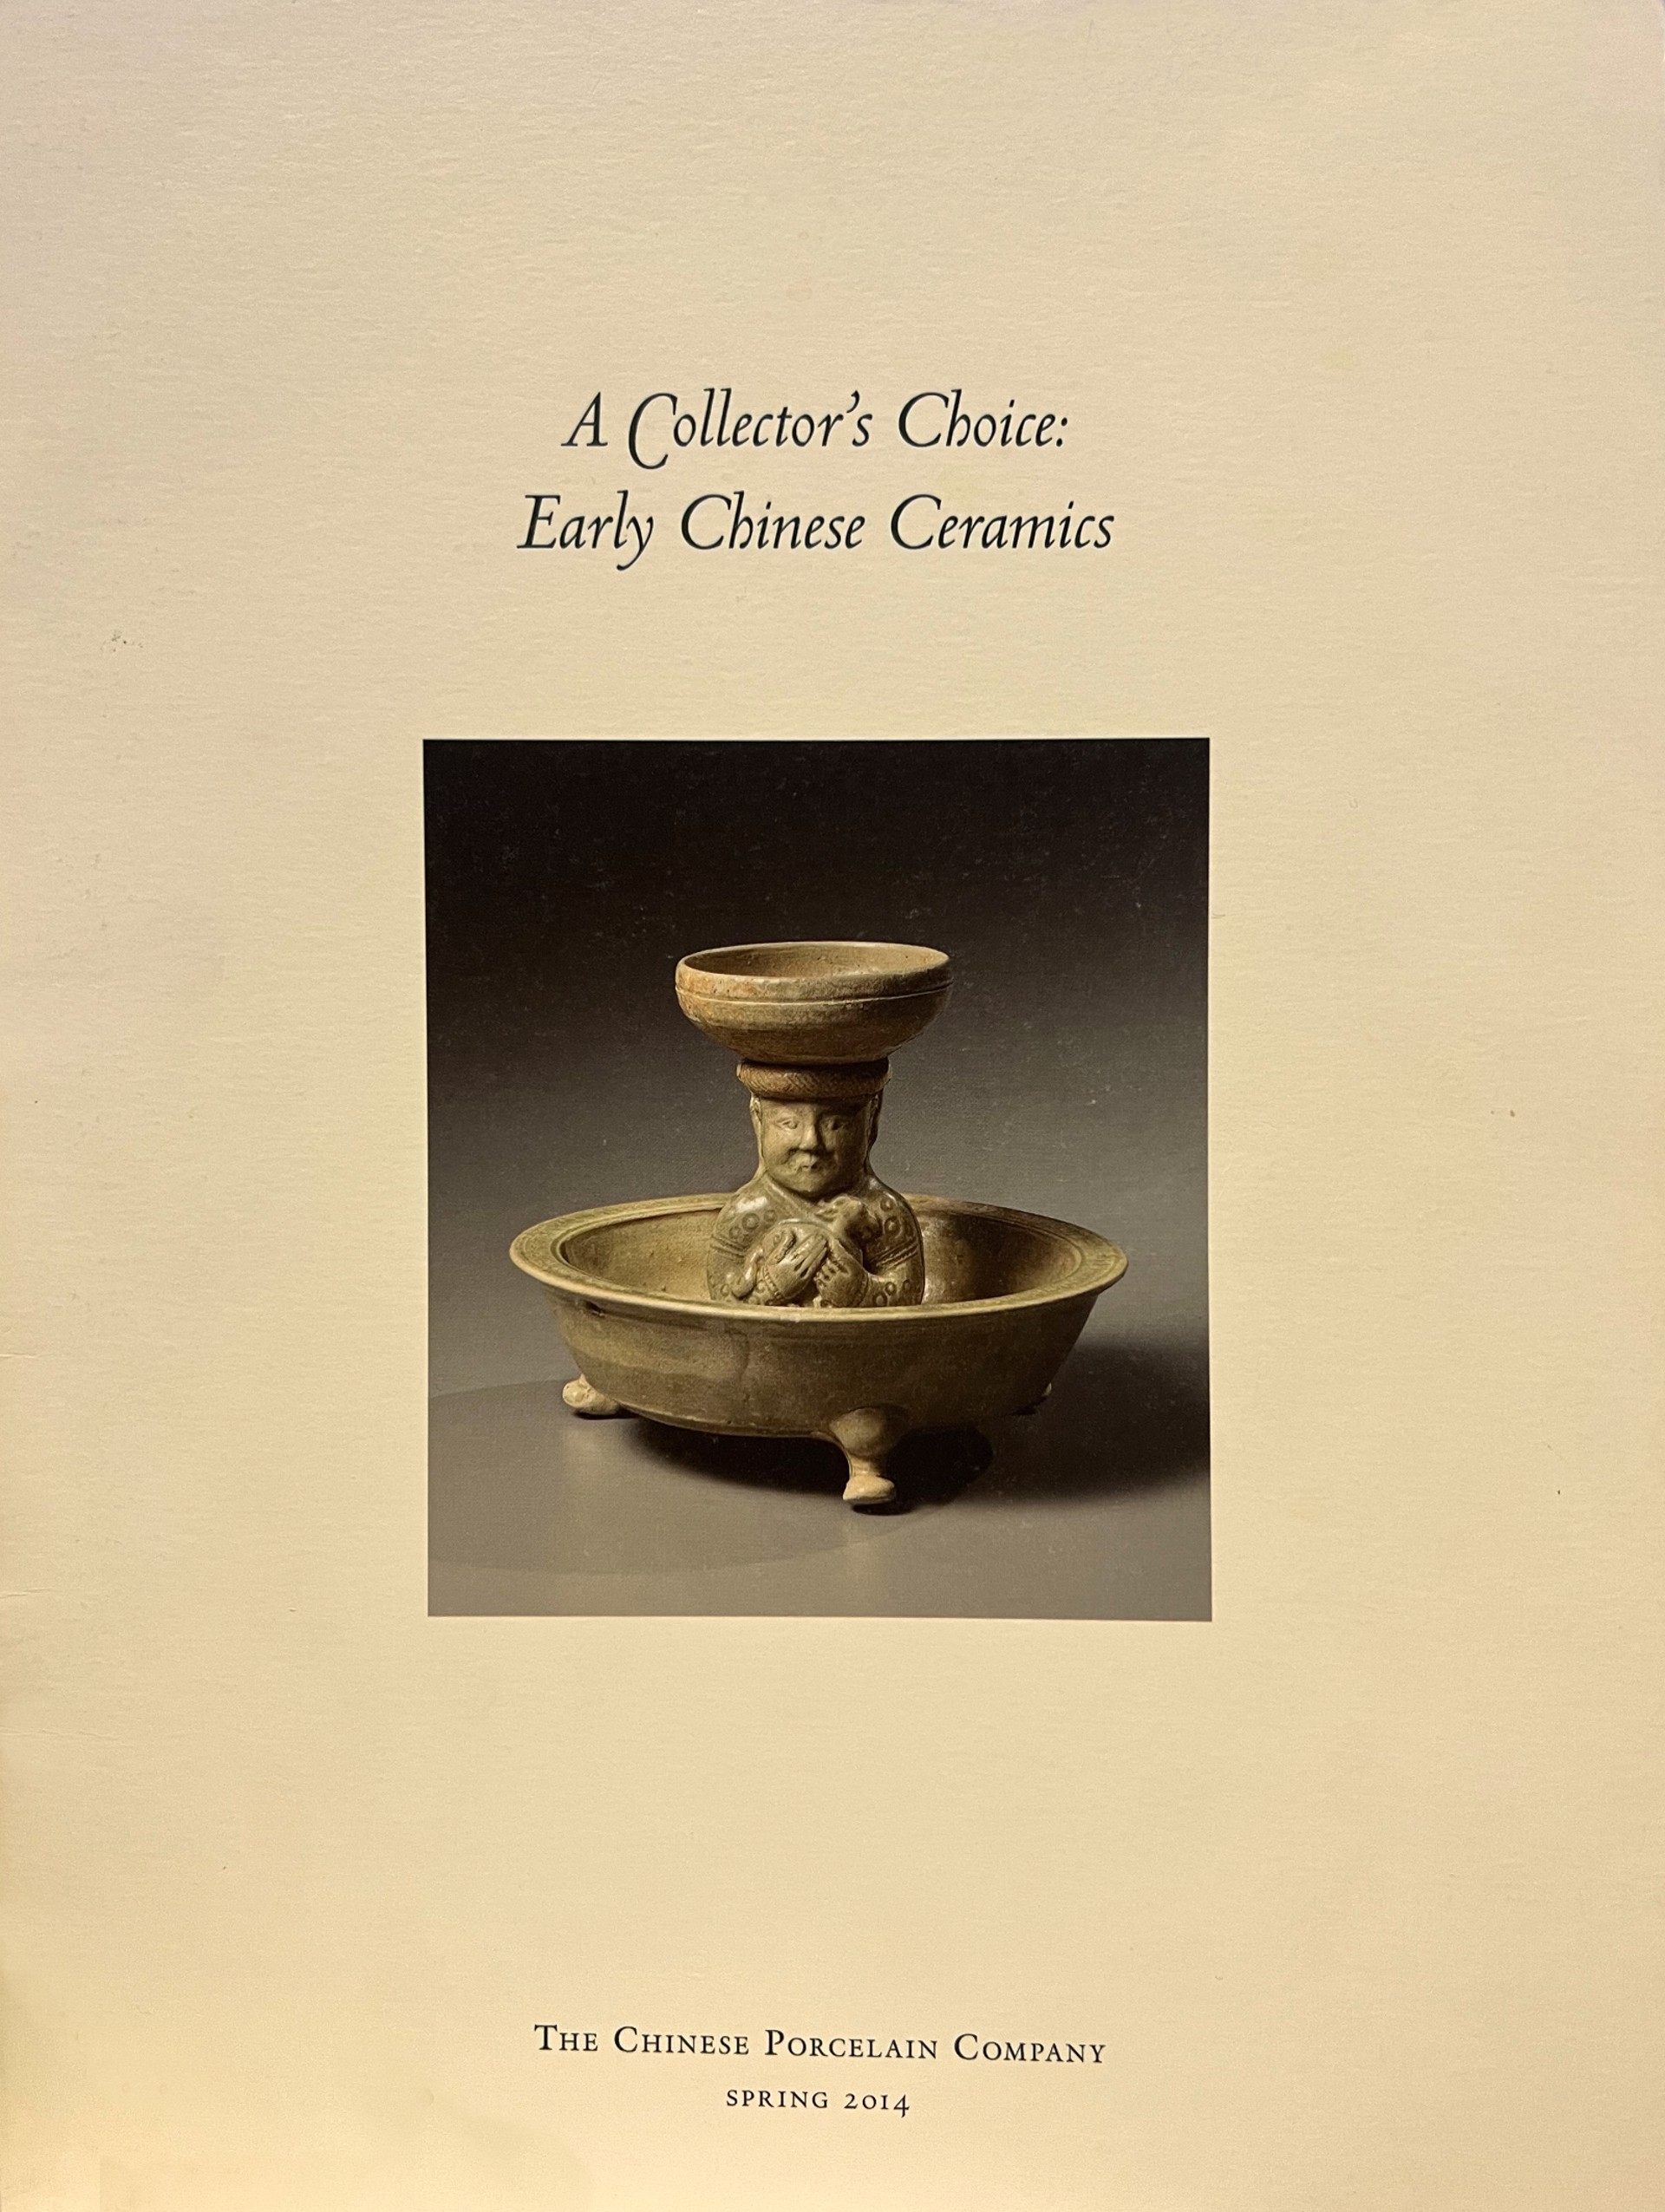 A COLLECTOR'S CHOICE: EARLY CHINESE CERAMICS by Brochure 18